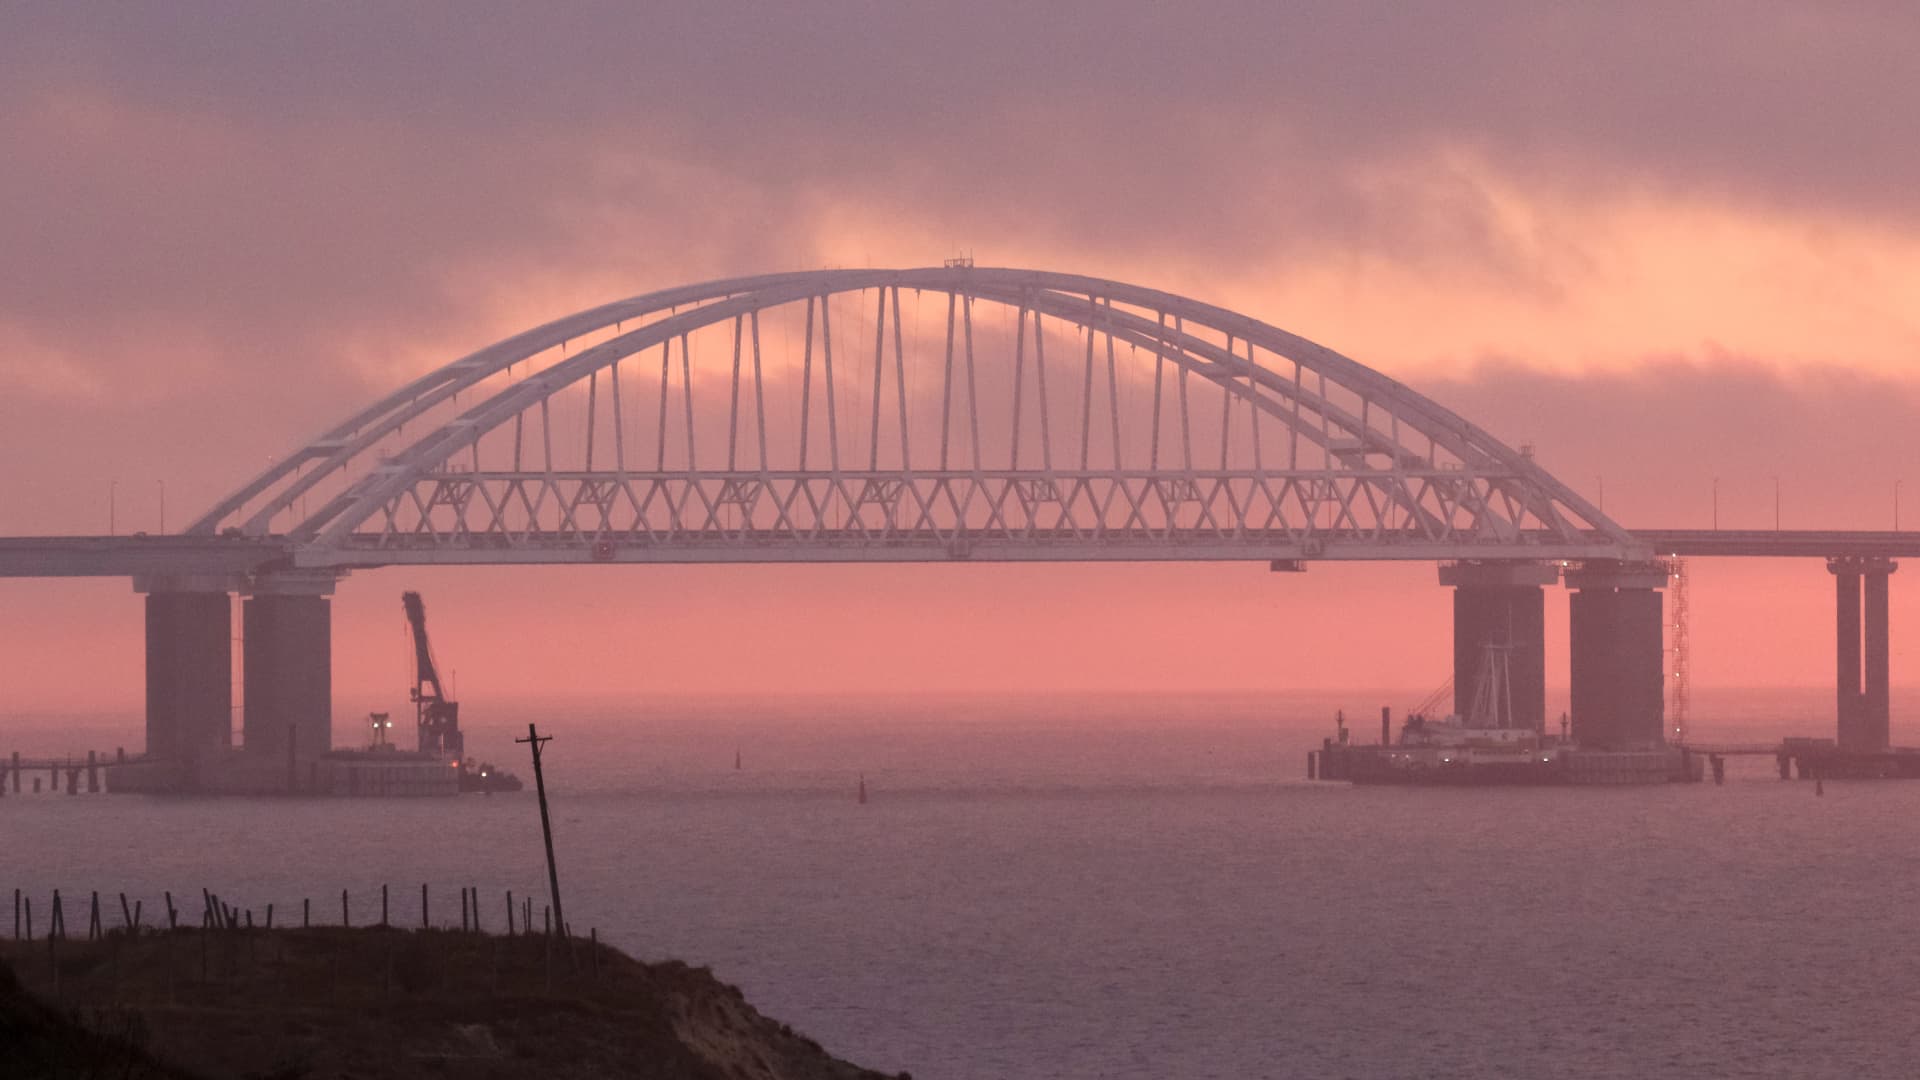 Russian authorities say a truck bomb caused a fire and damage to key Crimea bridge